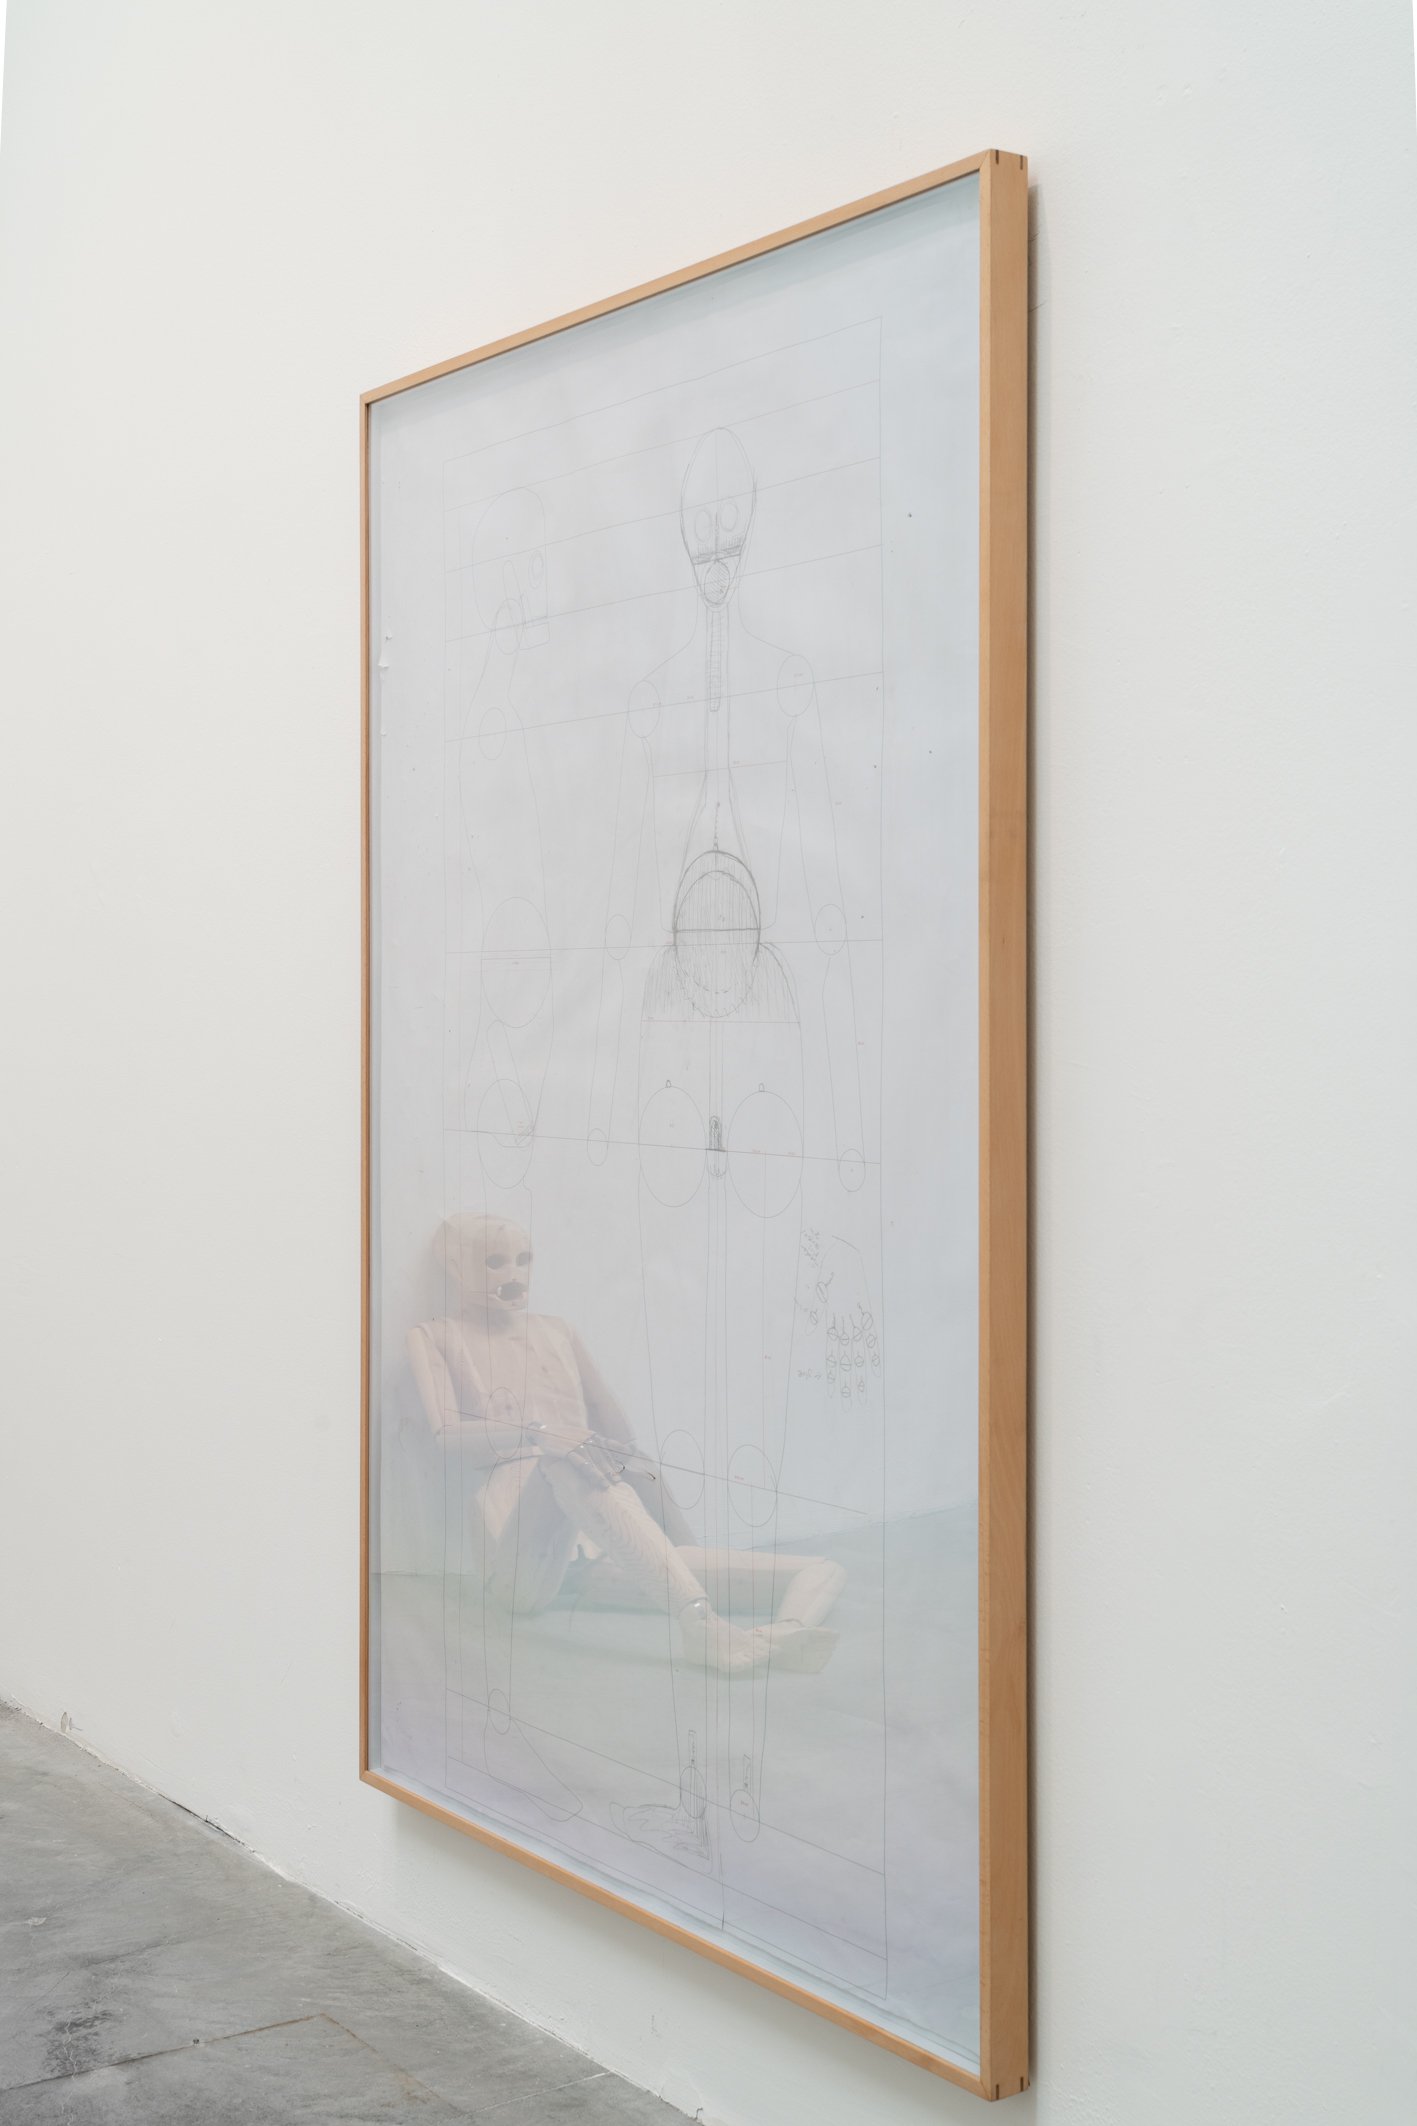 Sidsel Meineche Hansen, Untitled (blueprint for sex robot), technical drawing printed on paper, pen and pencil, custom made beech box frame, acid free / reversible mounting, 207 × 144 cm, 2018. Installation view, The Milk of Dreams, 59th International Art Exhibition – La Biennale di Venezia, Venice, 2022